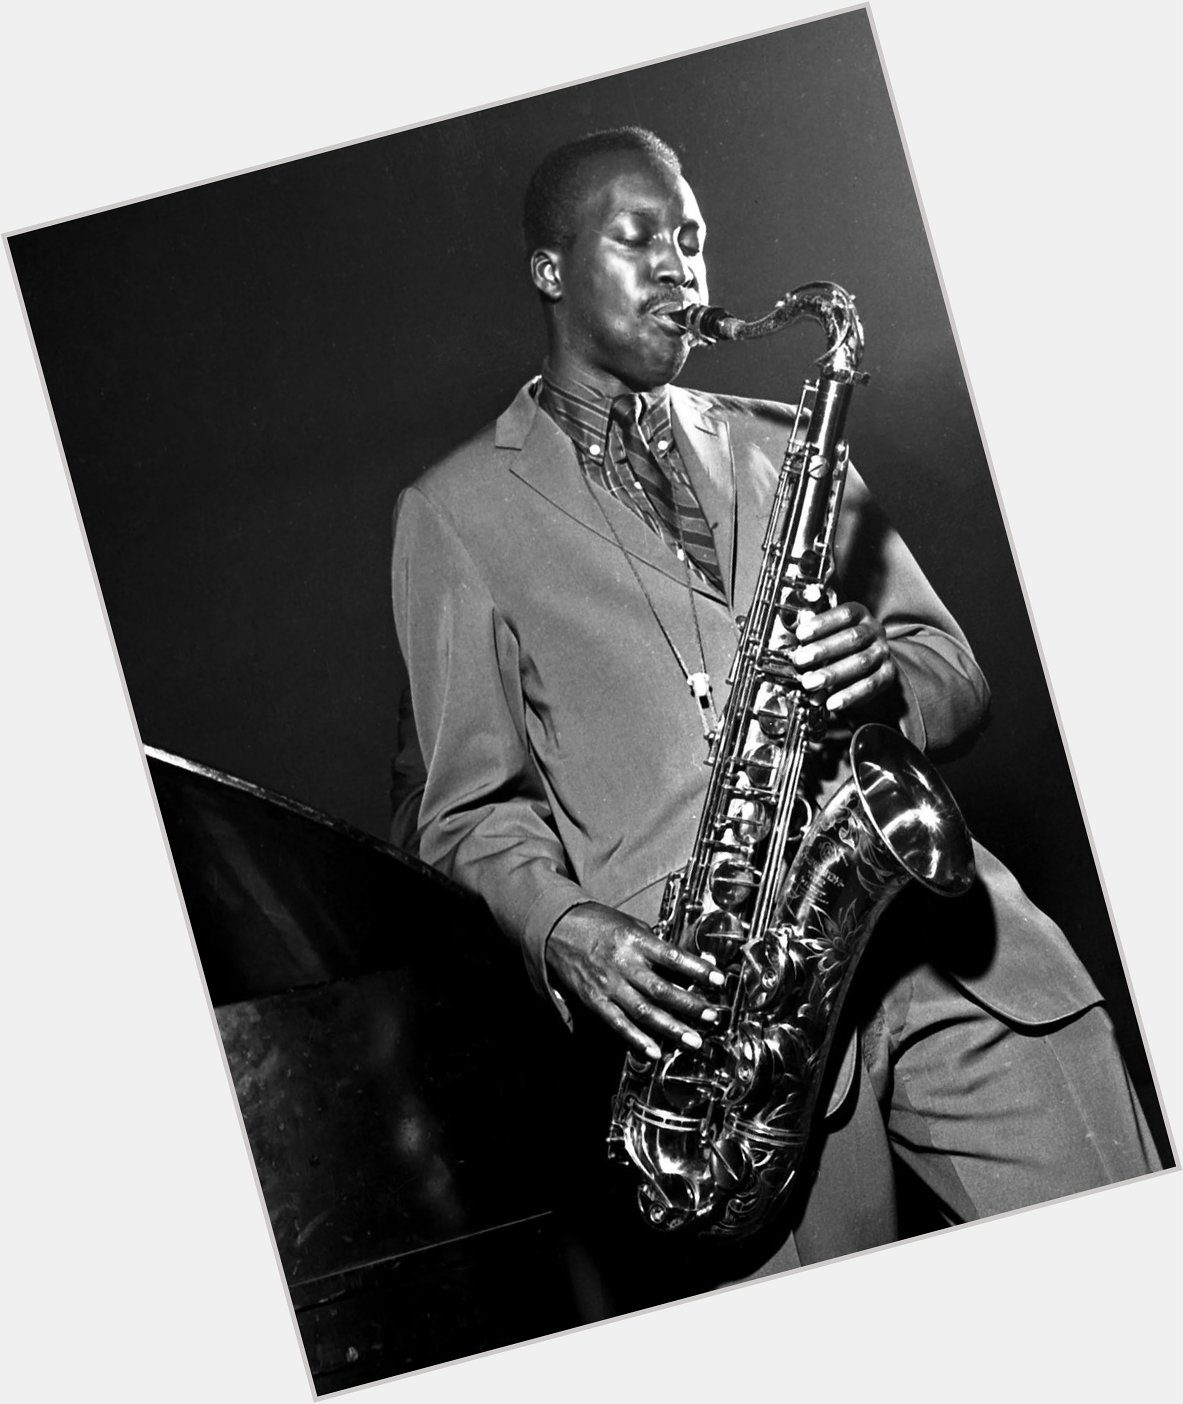 Happy birthday Hank Mobley! What s your favorite album by him? 